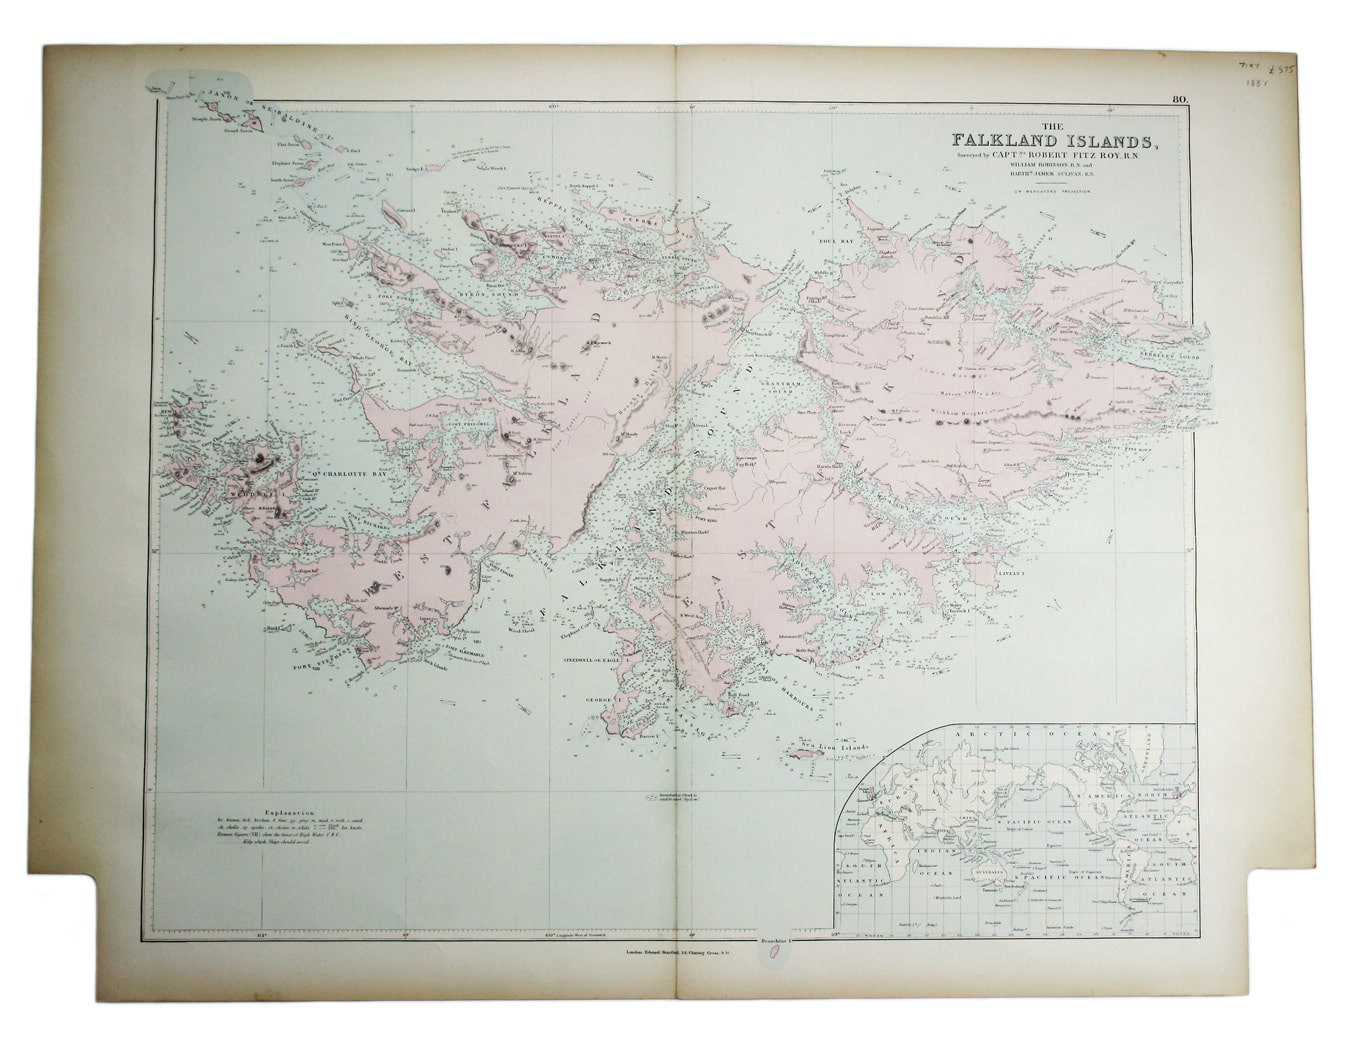 Stanford’s Map of the Falklands